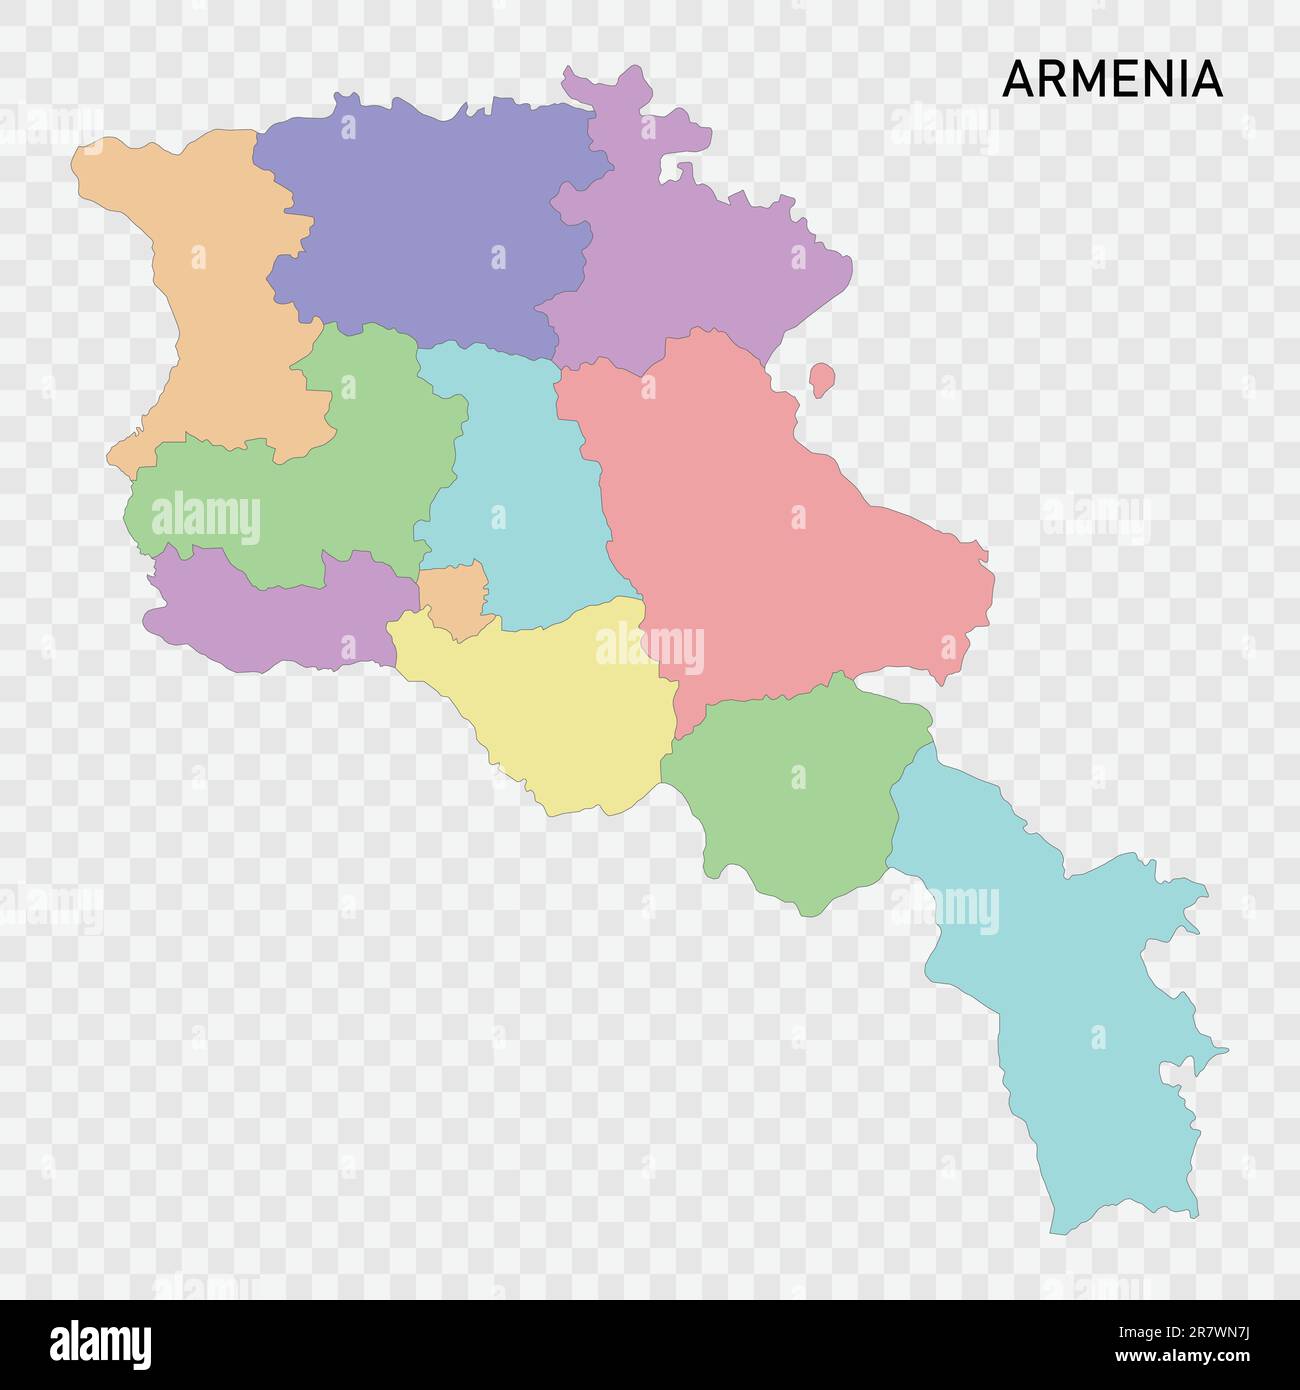 Isolated colored map of Armenia with borders of the regions Stock Vector